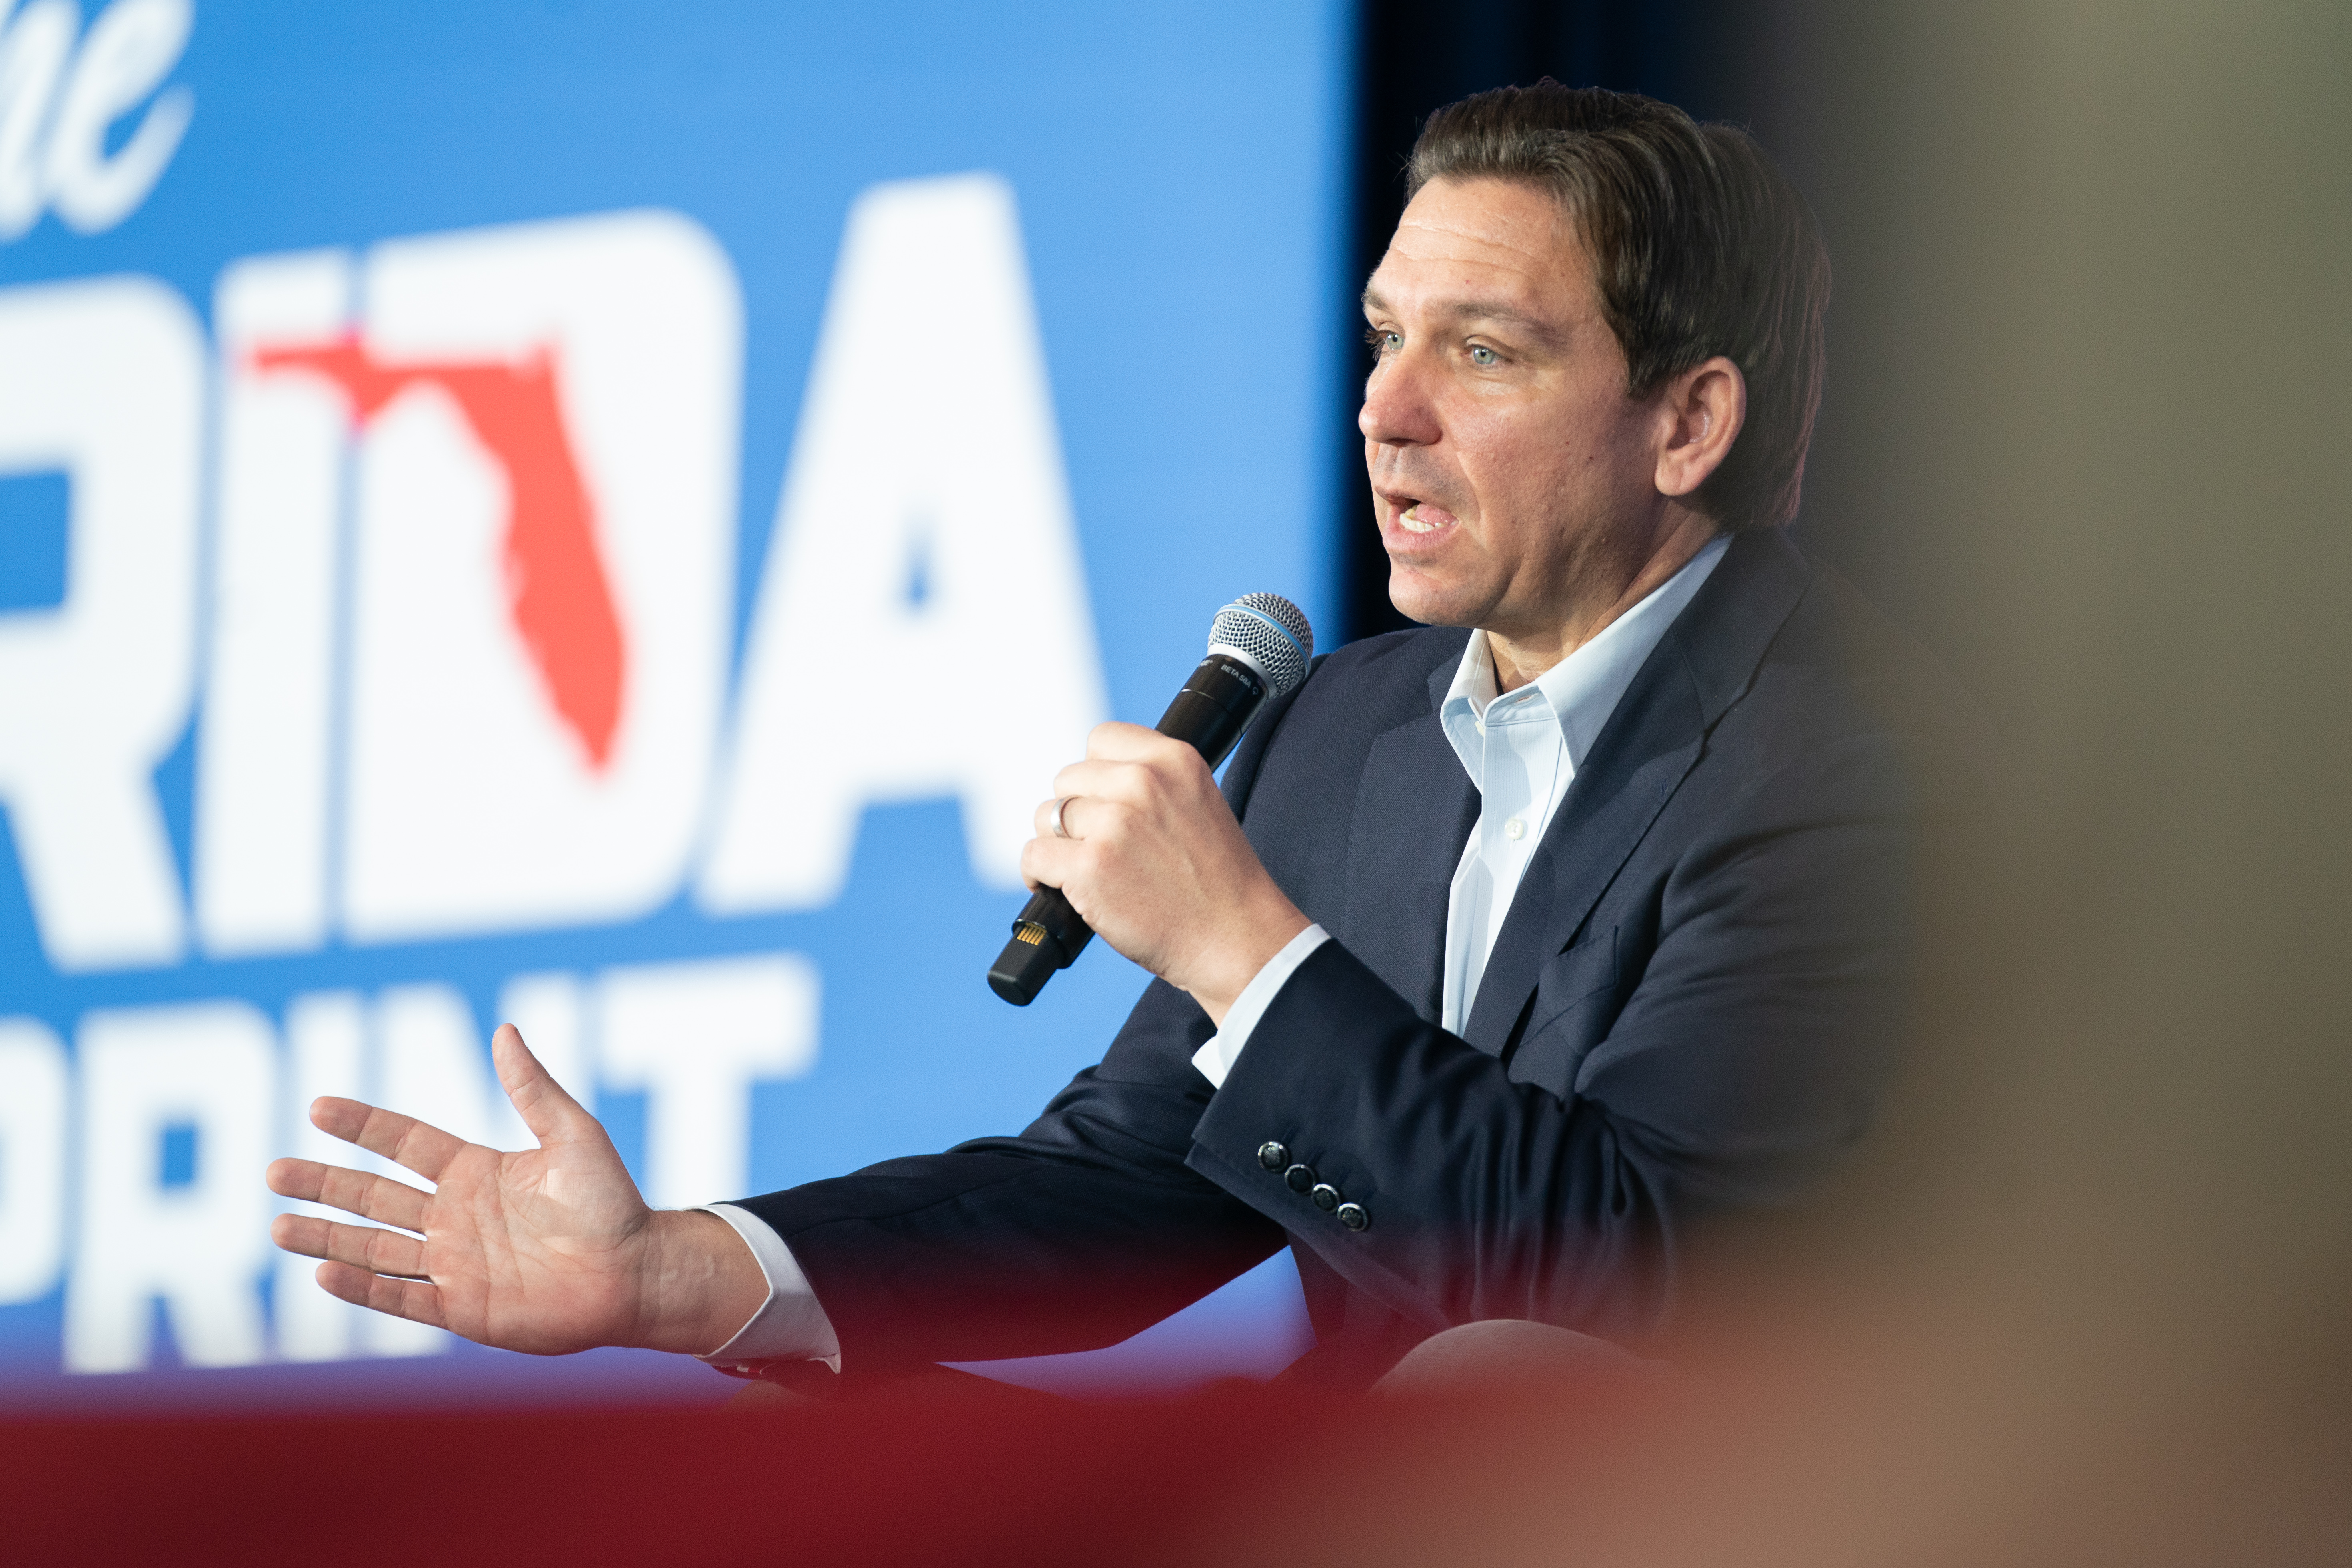 Ron DeSantis speaks into a handheld microphone, gesturing with his other hand. He’s wearing a blue suit and white shirt, and stands in front of a tall blue backdrop showing the state of Florida.